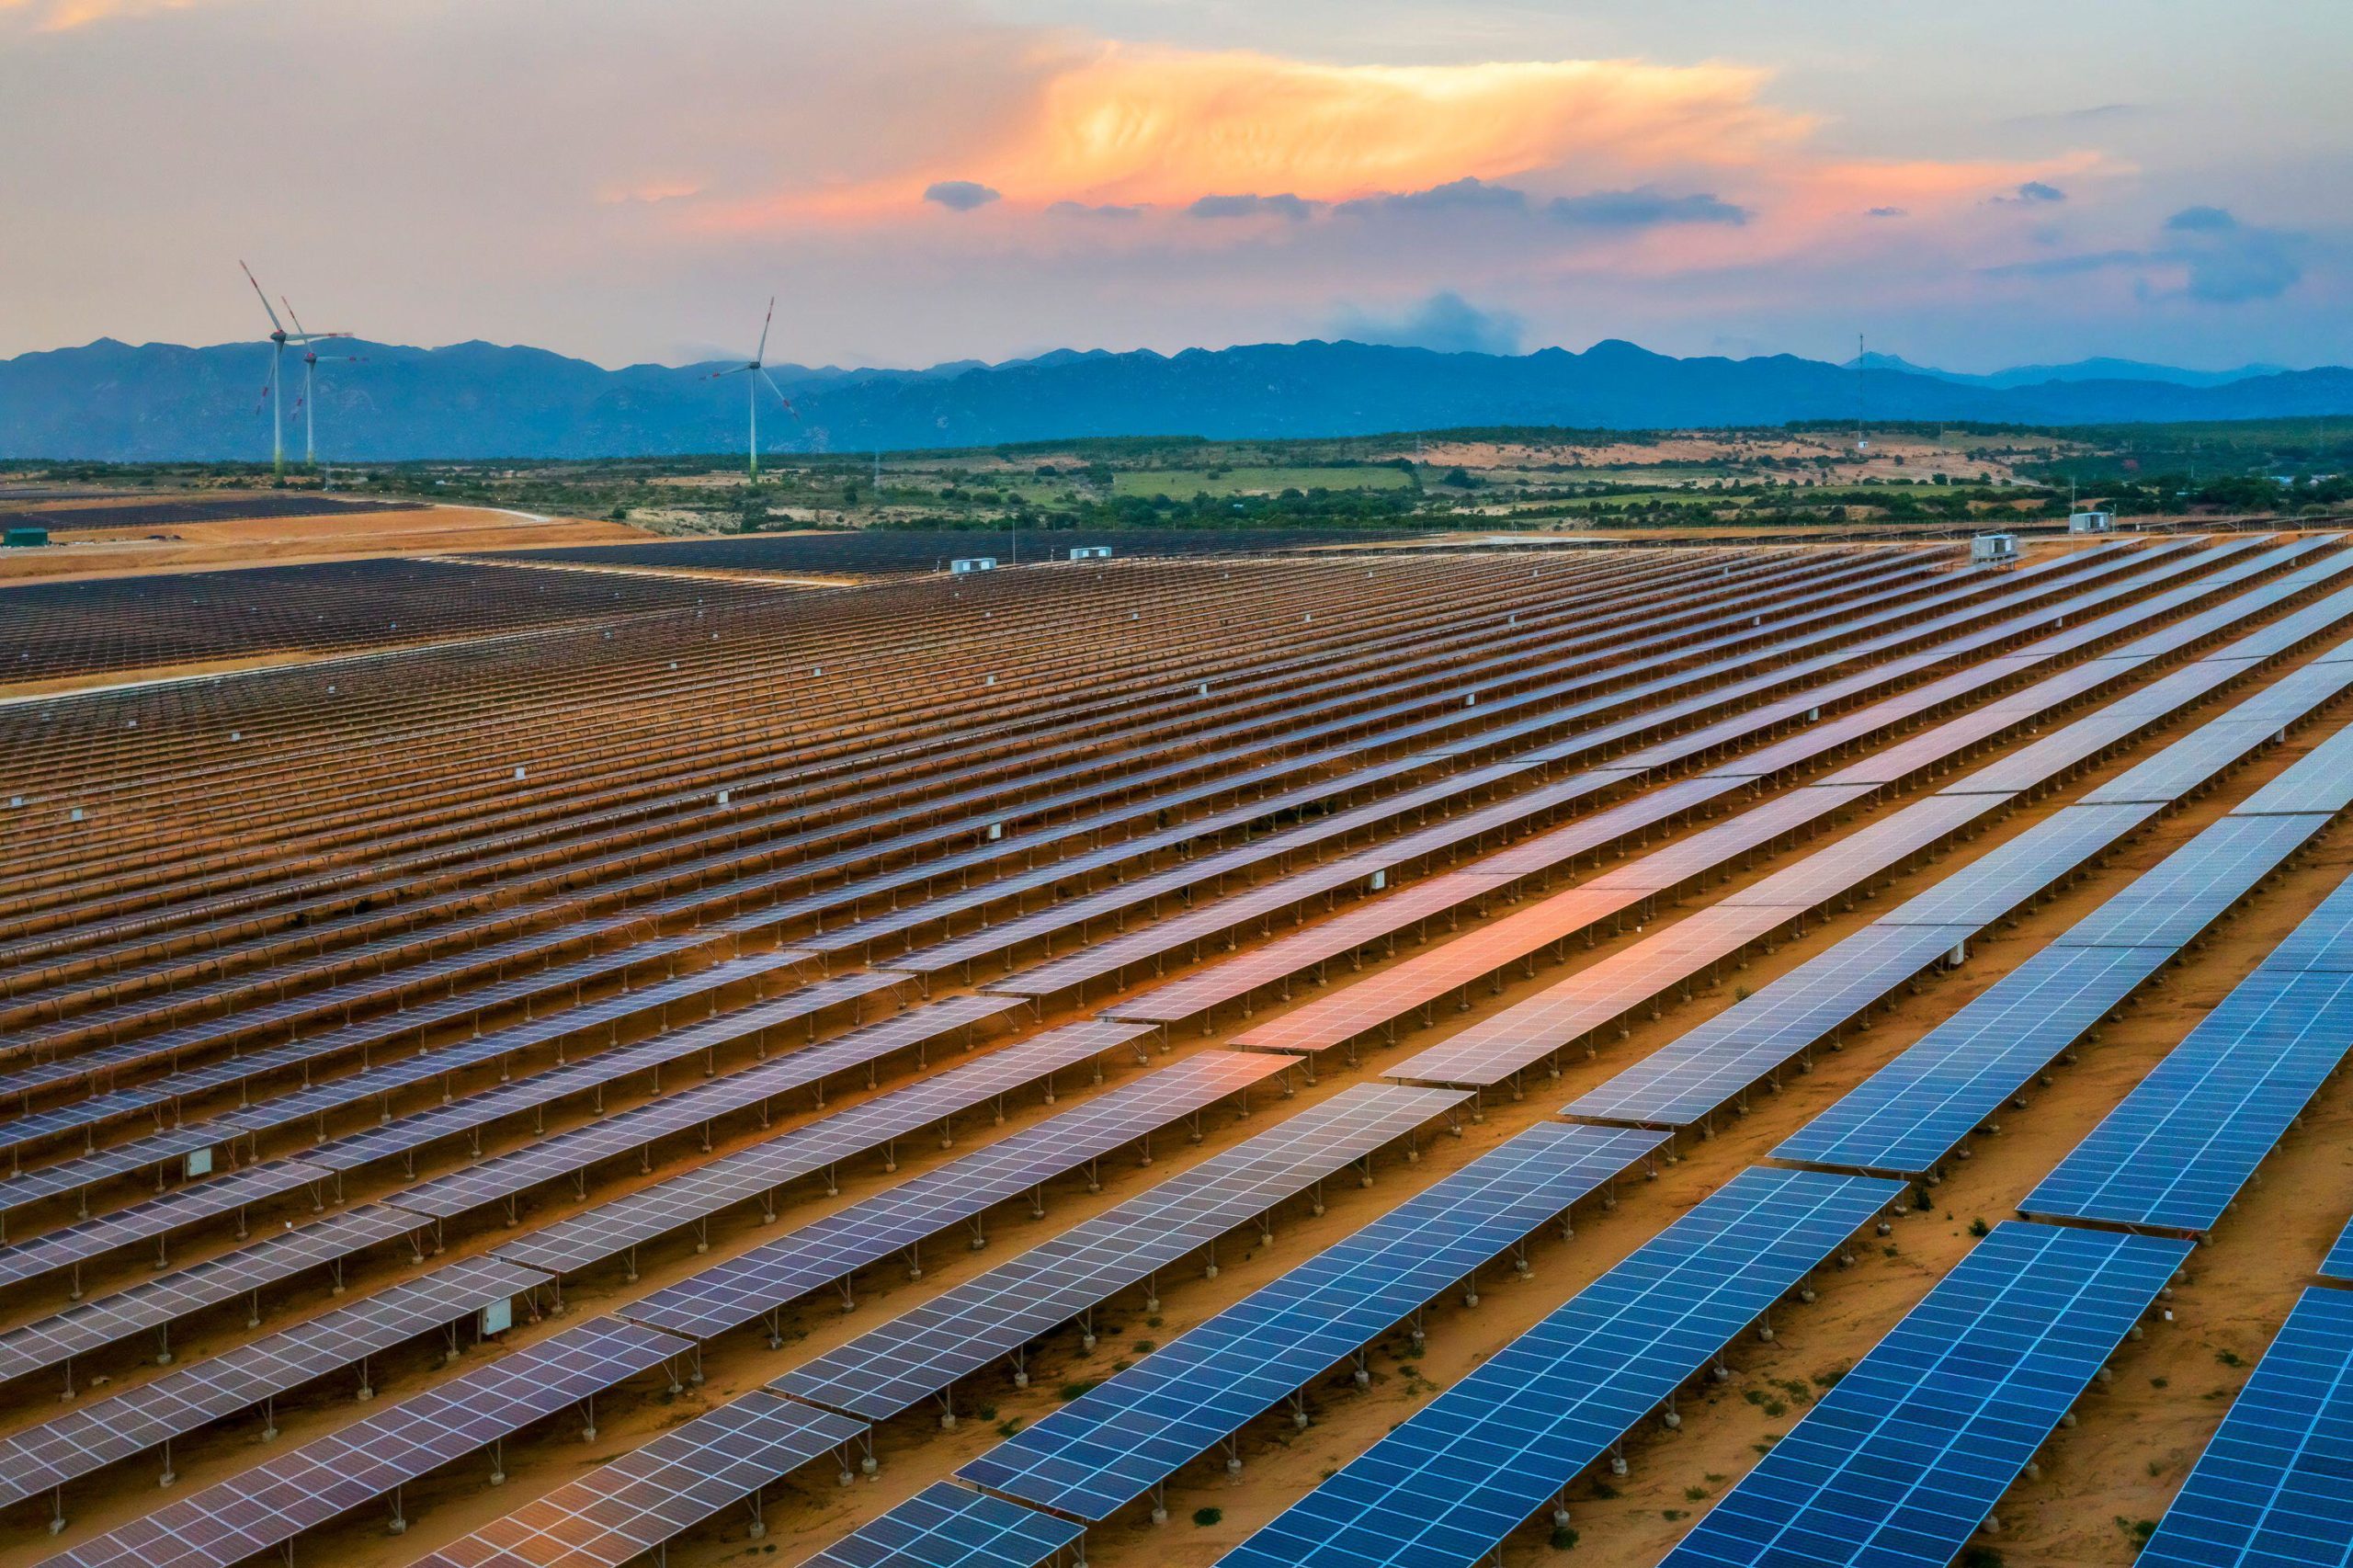 A solar farm in Ninh Thuan, Vietnam, photographed in January 2020 (Image: Alamy)